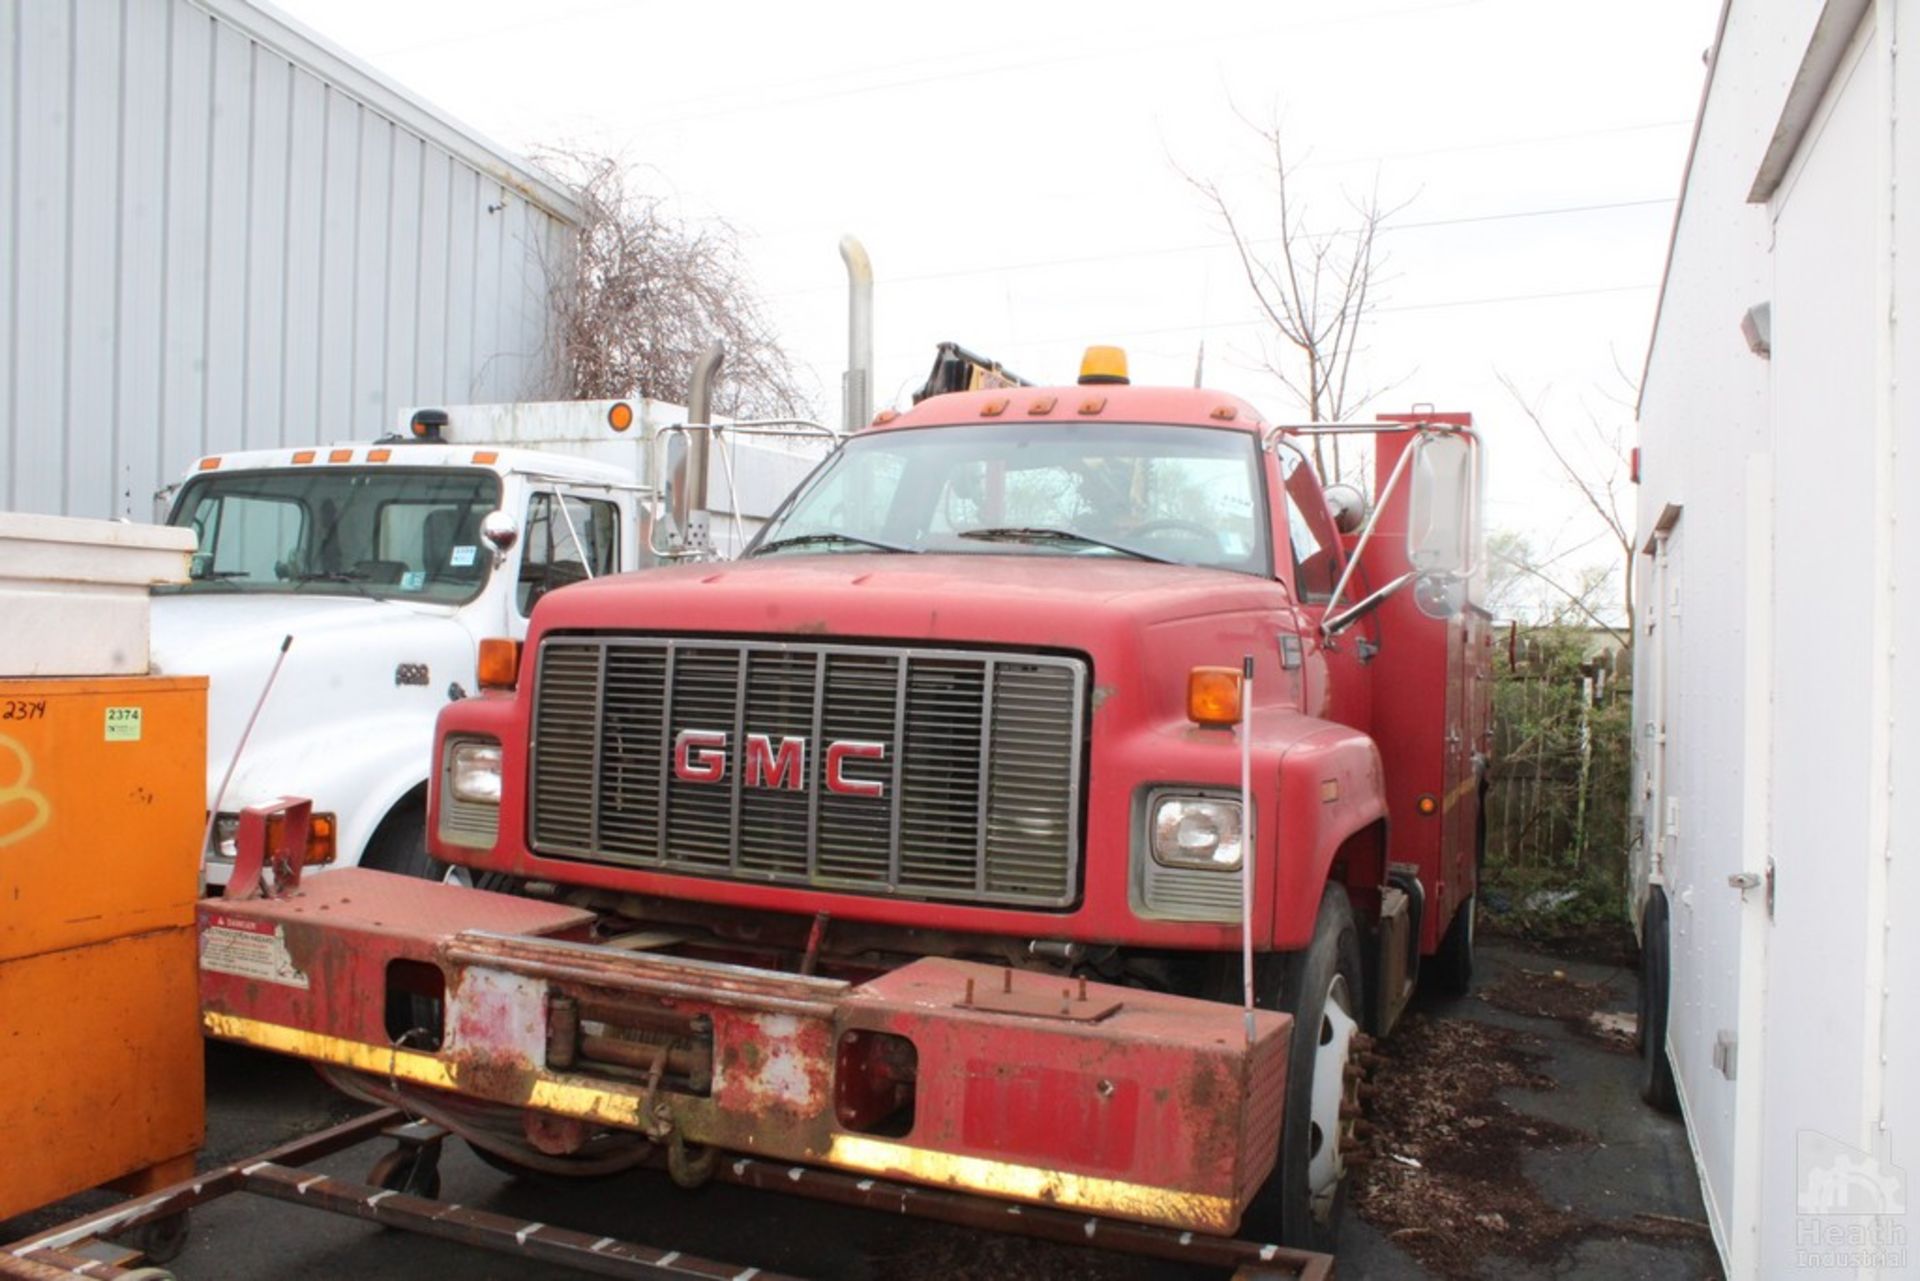 GMC C6500 SERIES CONTRACTOR BODY | IMT MODEL 2015-20 2500 LBS EXTENDED BOOM CABLE CRANE | FRONT